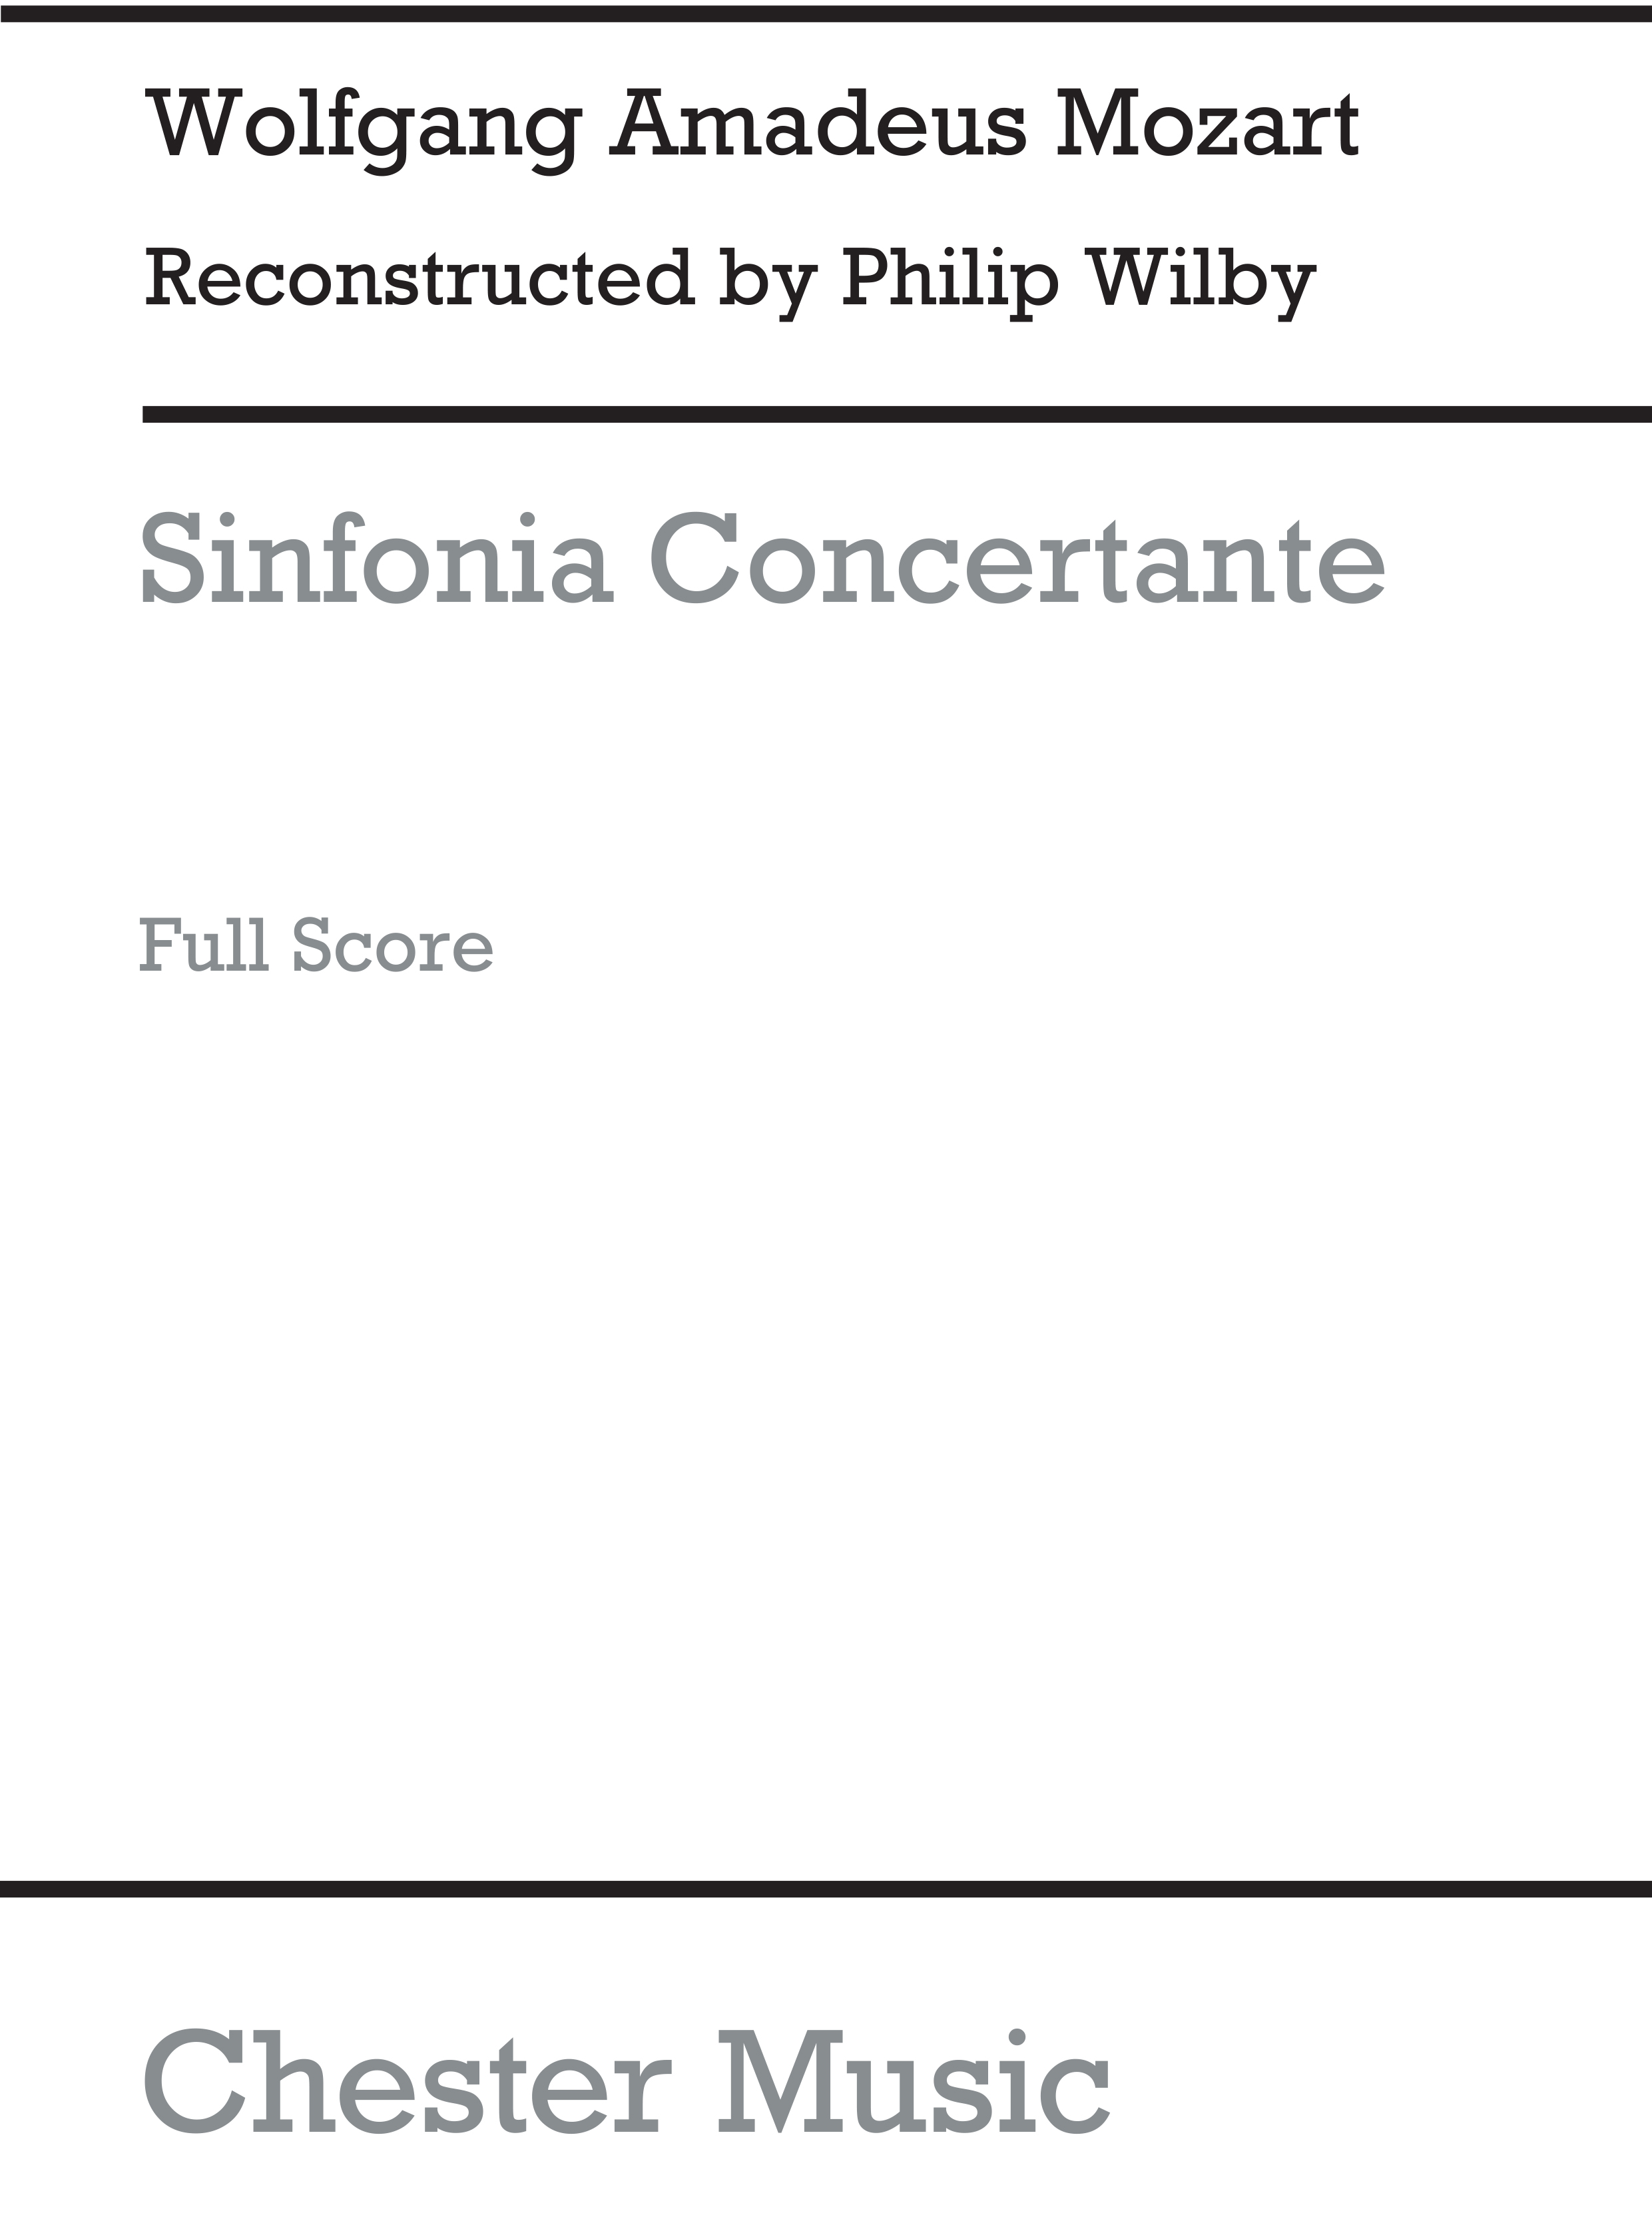 Wolfgang Amadeus Mozart: Sinfonia Concertante in A (Wilby): String Trio: Score